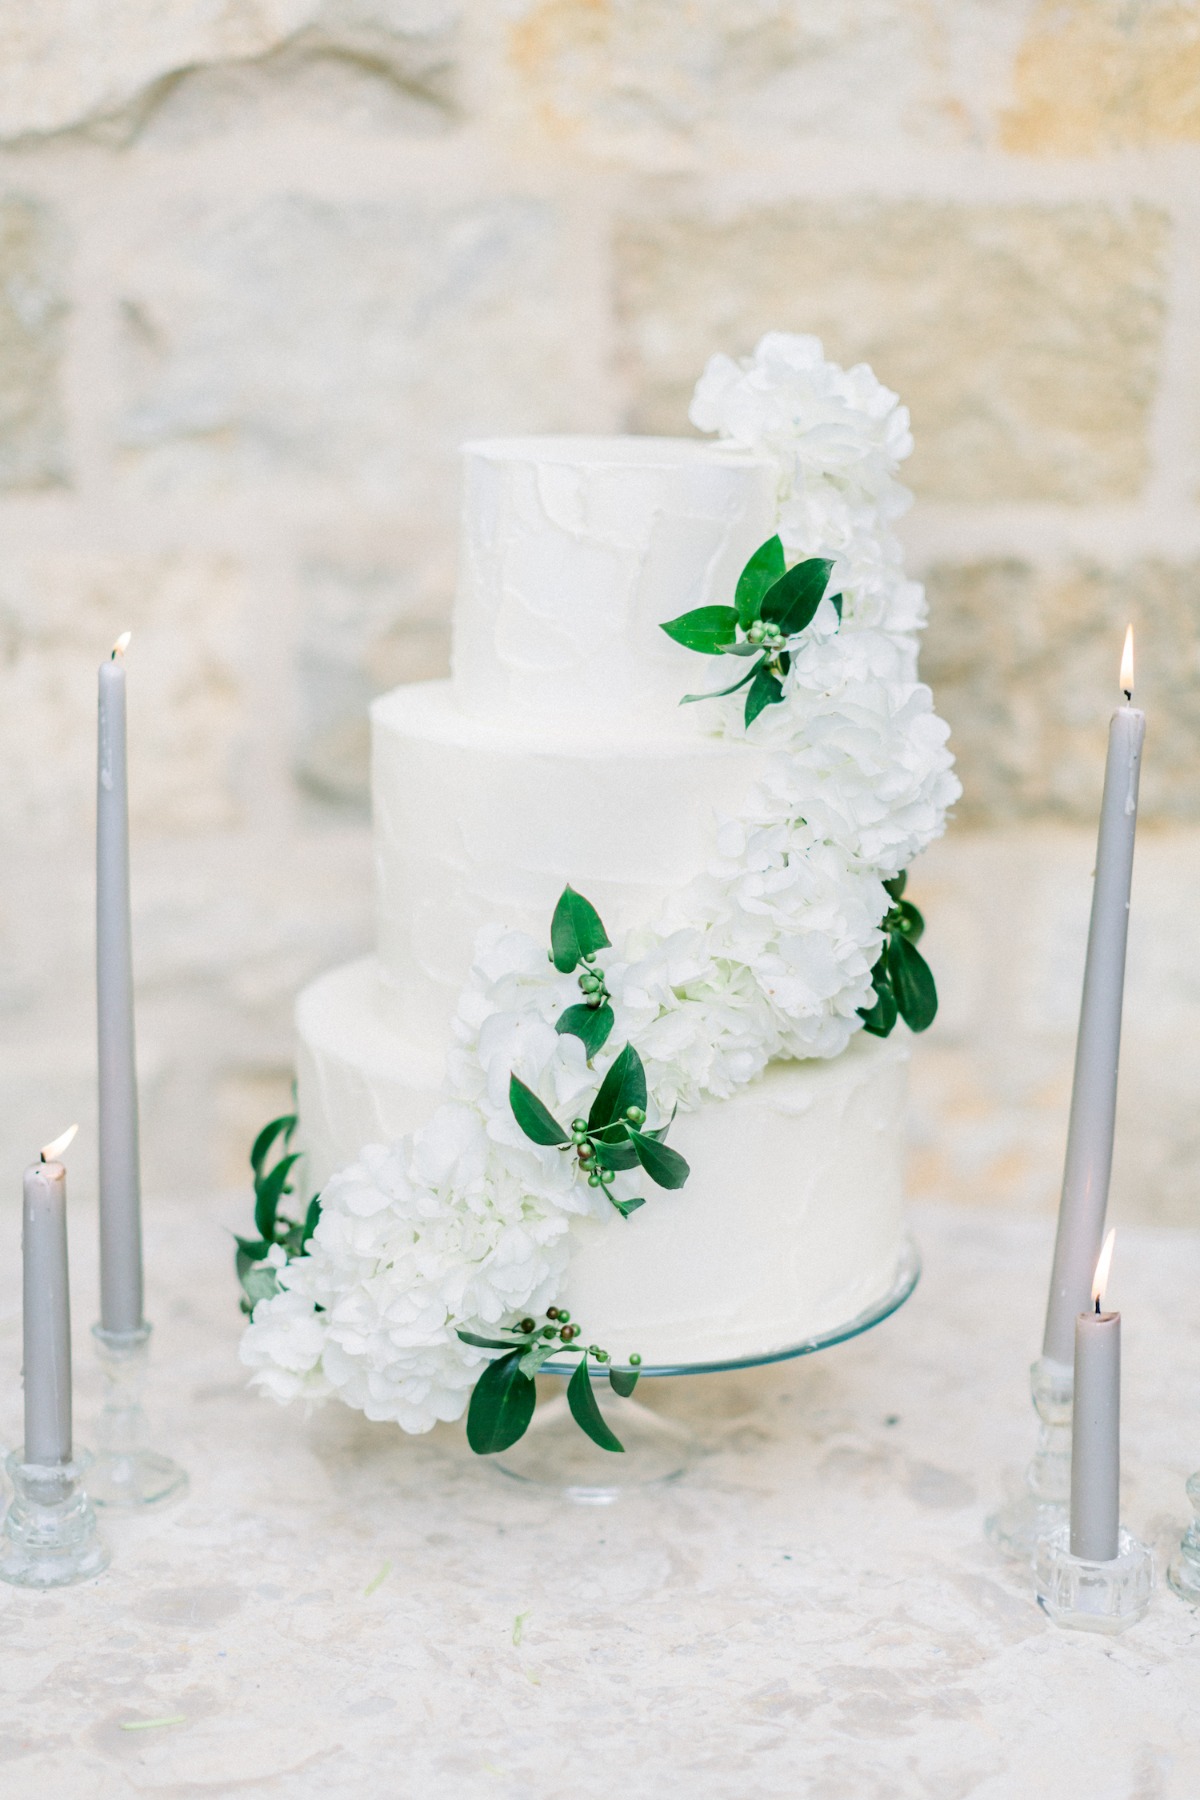 White and green wedding cake by Crush cakes